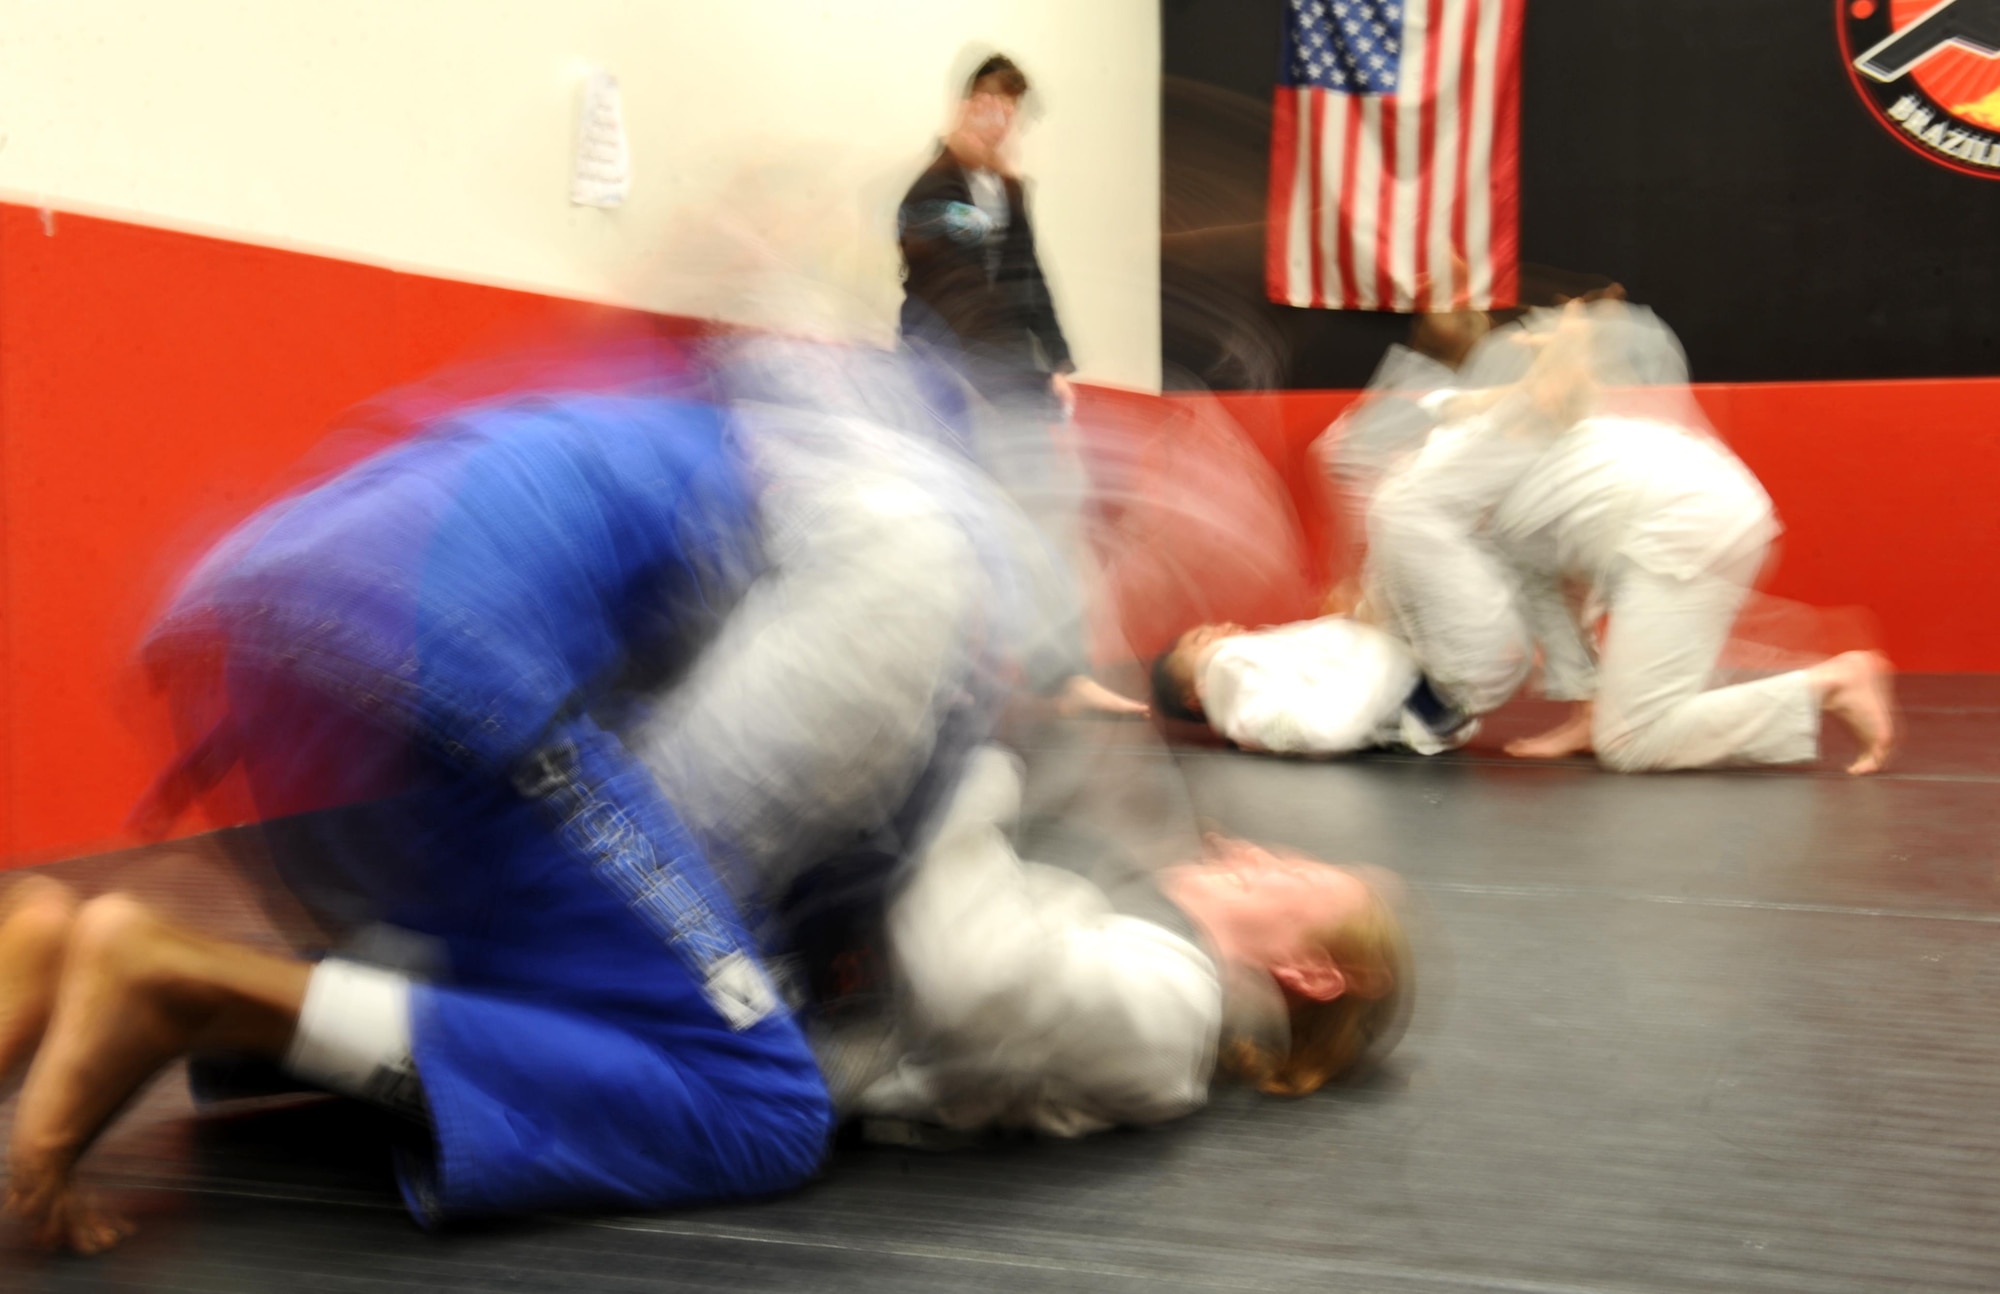 Members of Team Whiteman spar during a Brazilian Jiu Jitsu class at the fitness center on Whiteman Air Force Base, Mo., Jan. 30, 2017. Brazilian Jiu Jitsu, a ground based martial art, teaches practitioners to fight from their backs. Adult and youth classes are offered weekly at the Whiteman fitness center. (U.S. Air Force photo by Tech. Sgt. Miguel Lara)